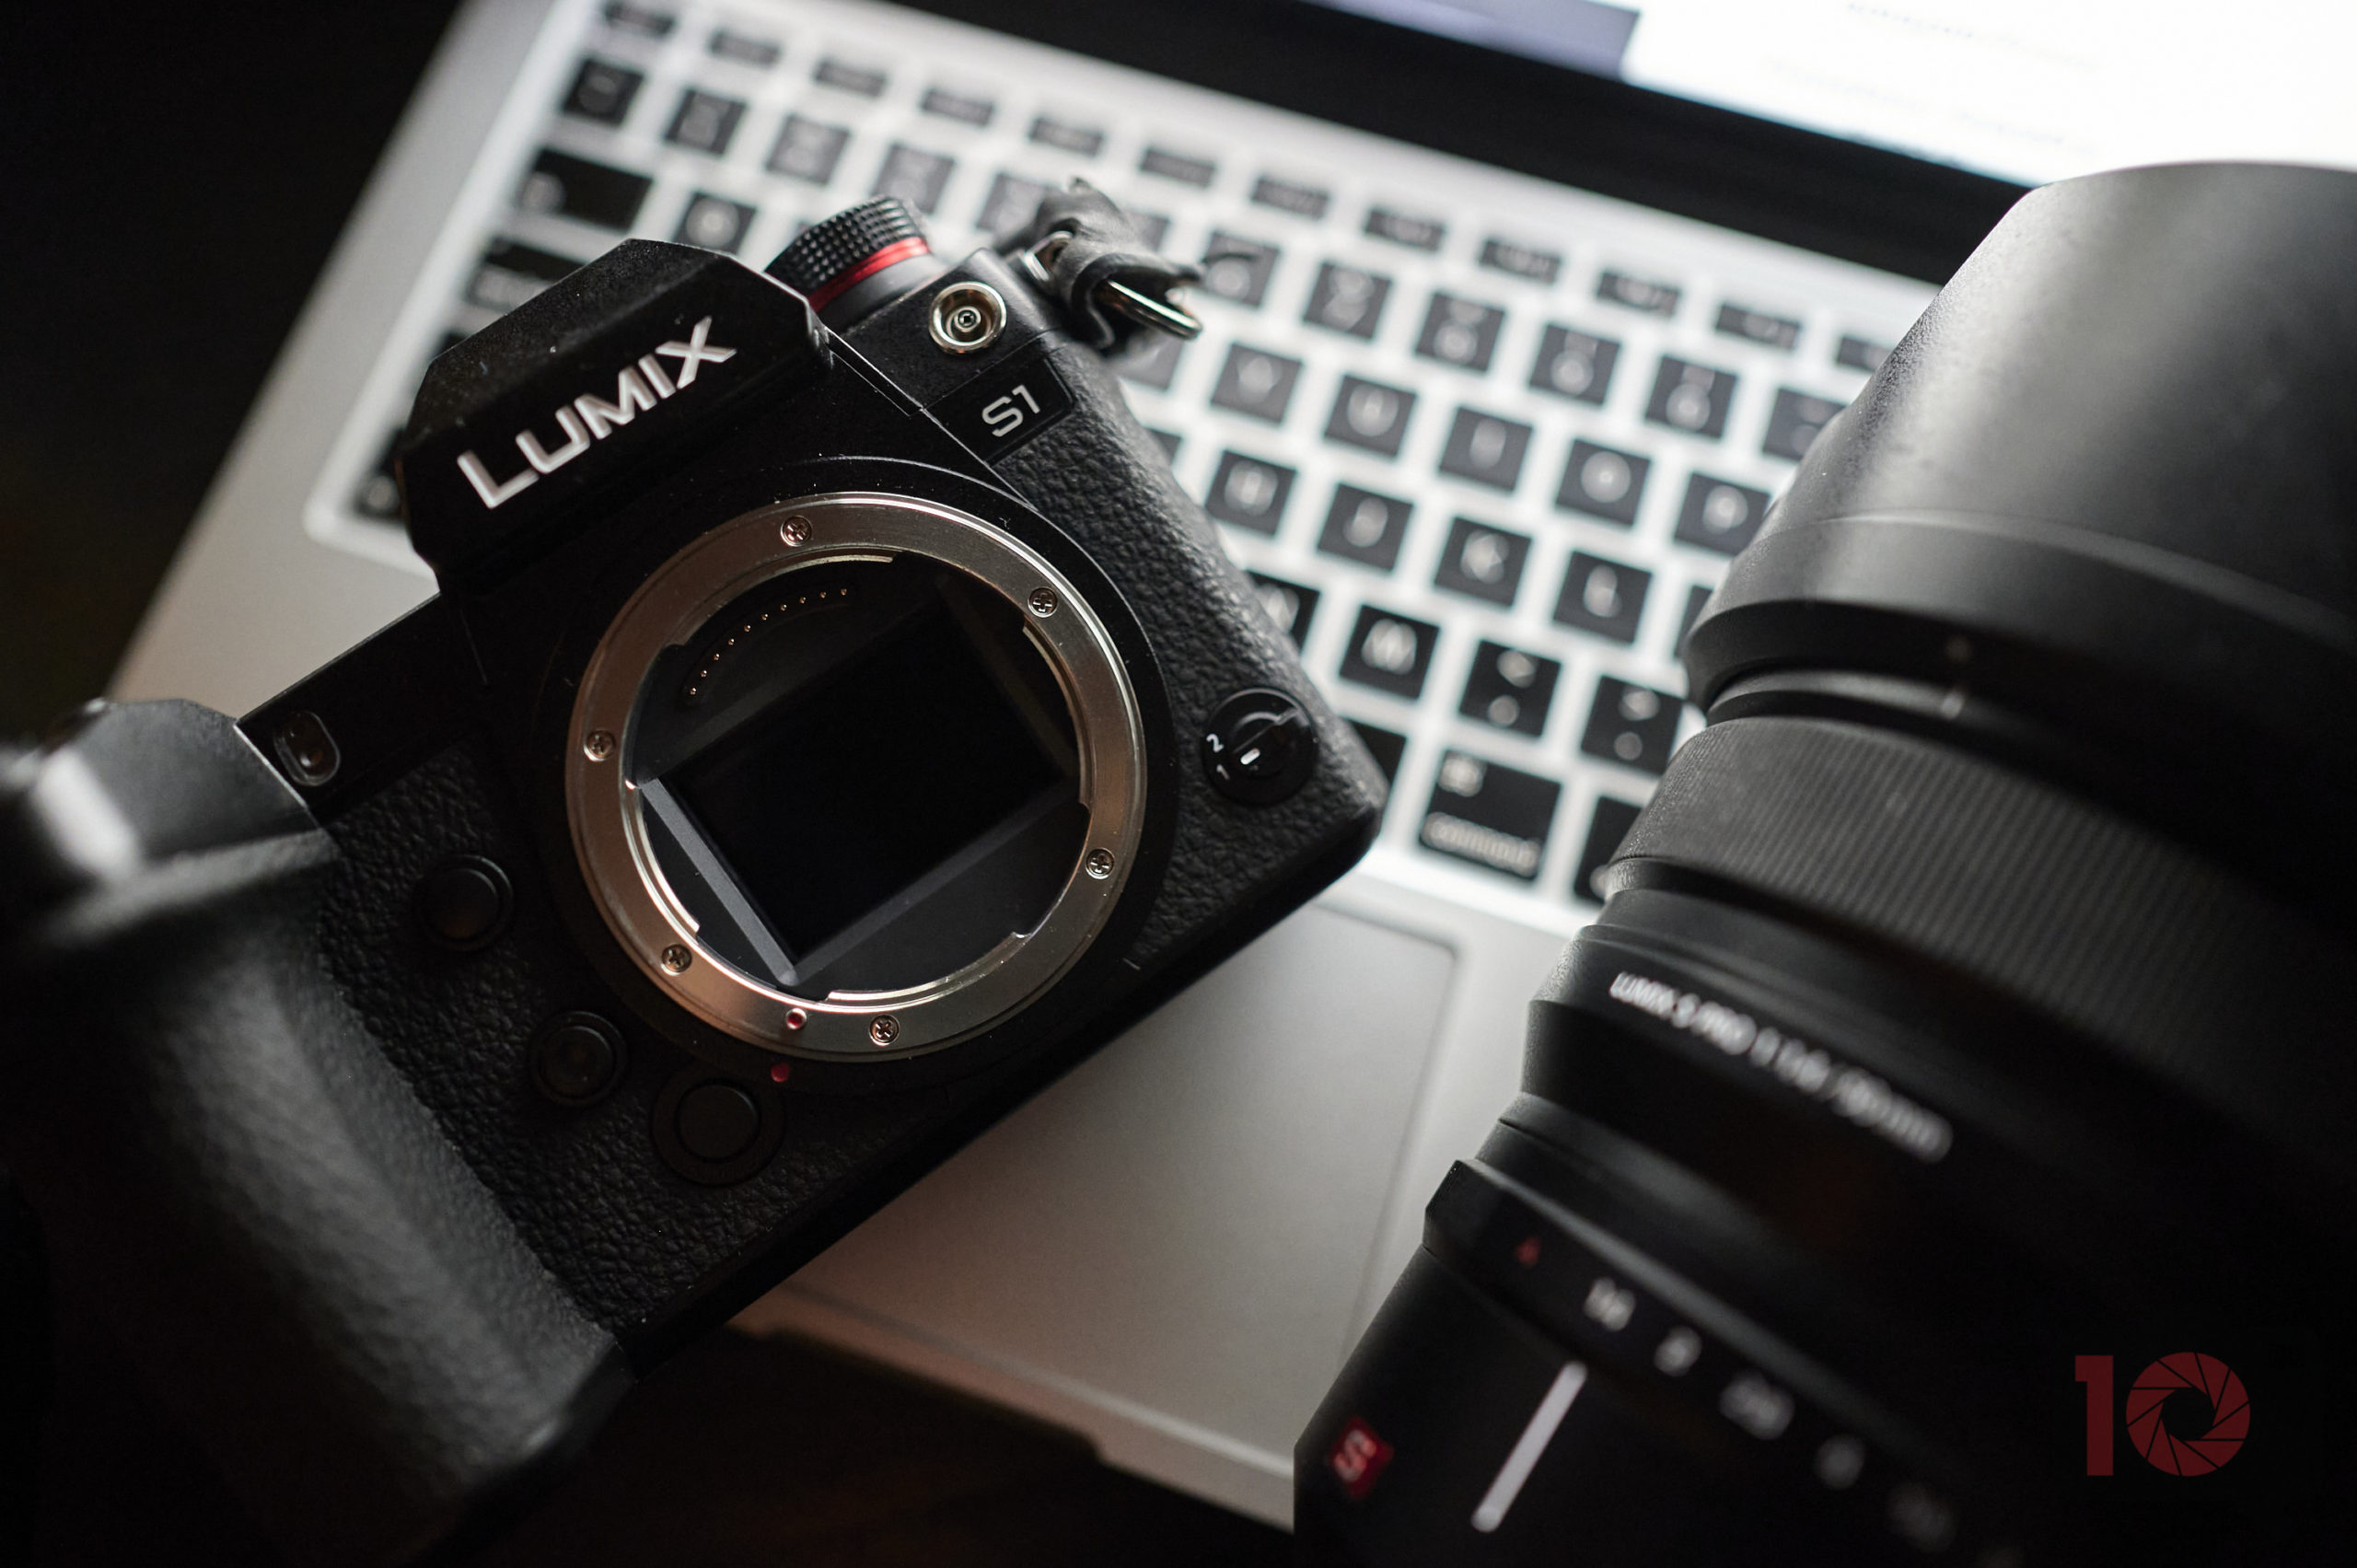 Lumix GX9 – A Good Place to Stand